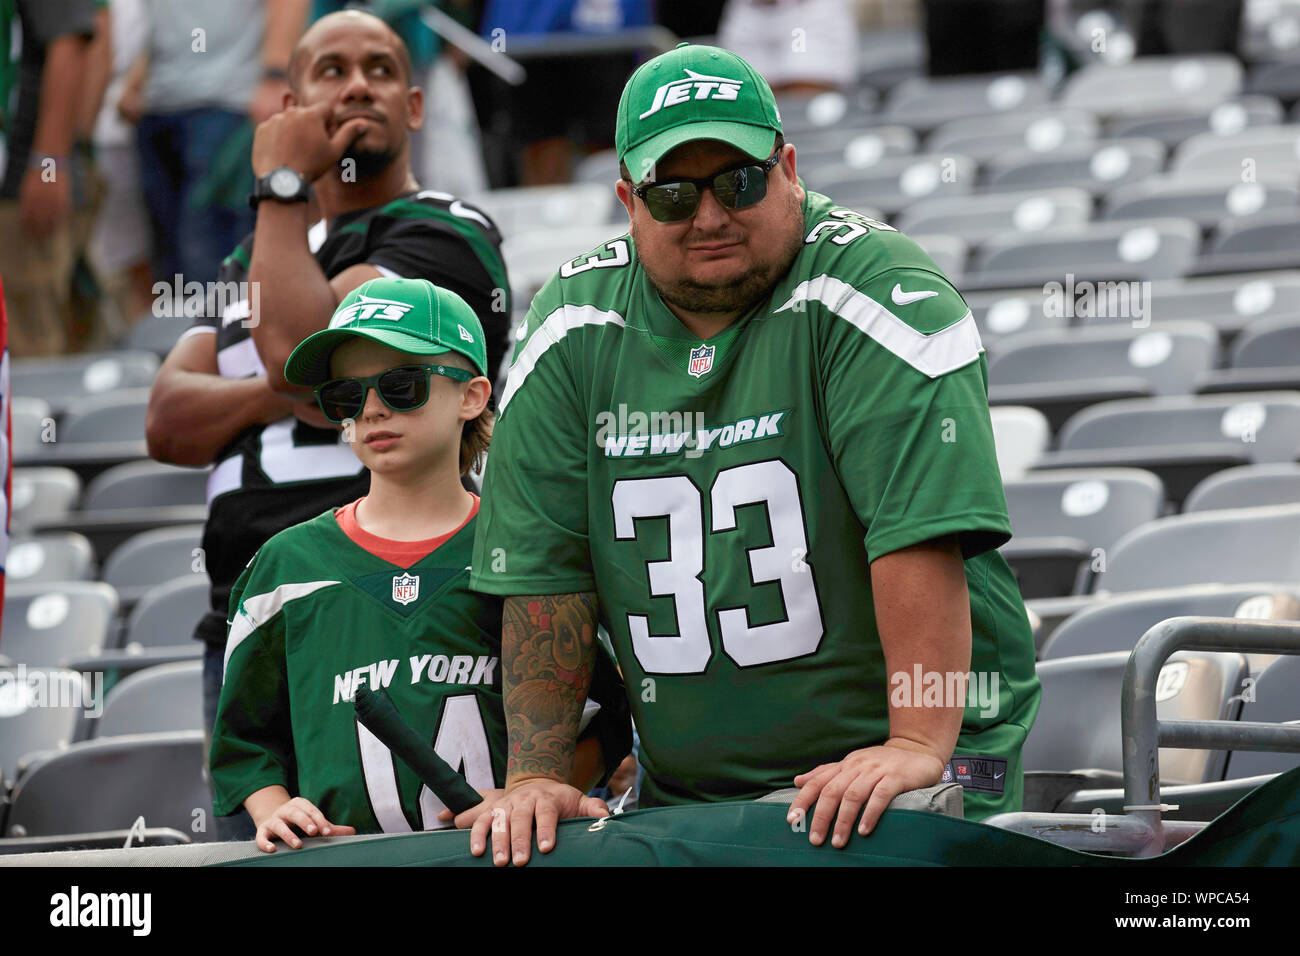 East Rutherford, New Jersey, USA. 8th Sep, 2019. New York Jets fans after a  NFL game between the Buffalo Bills and the New York Jets at MetLife Stadium  in East Rutherford, New